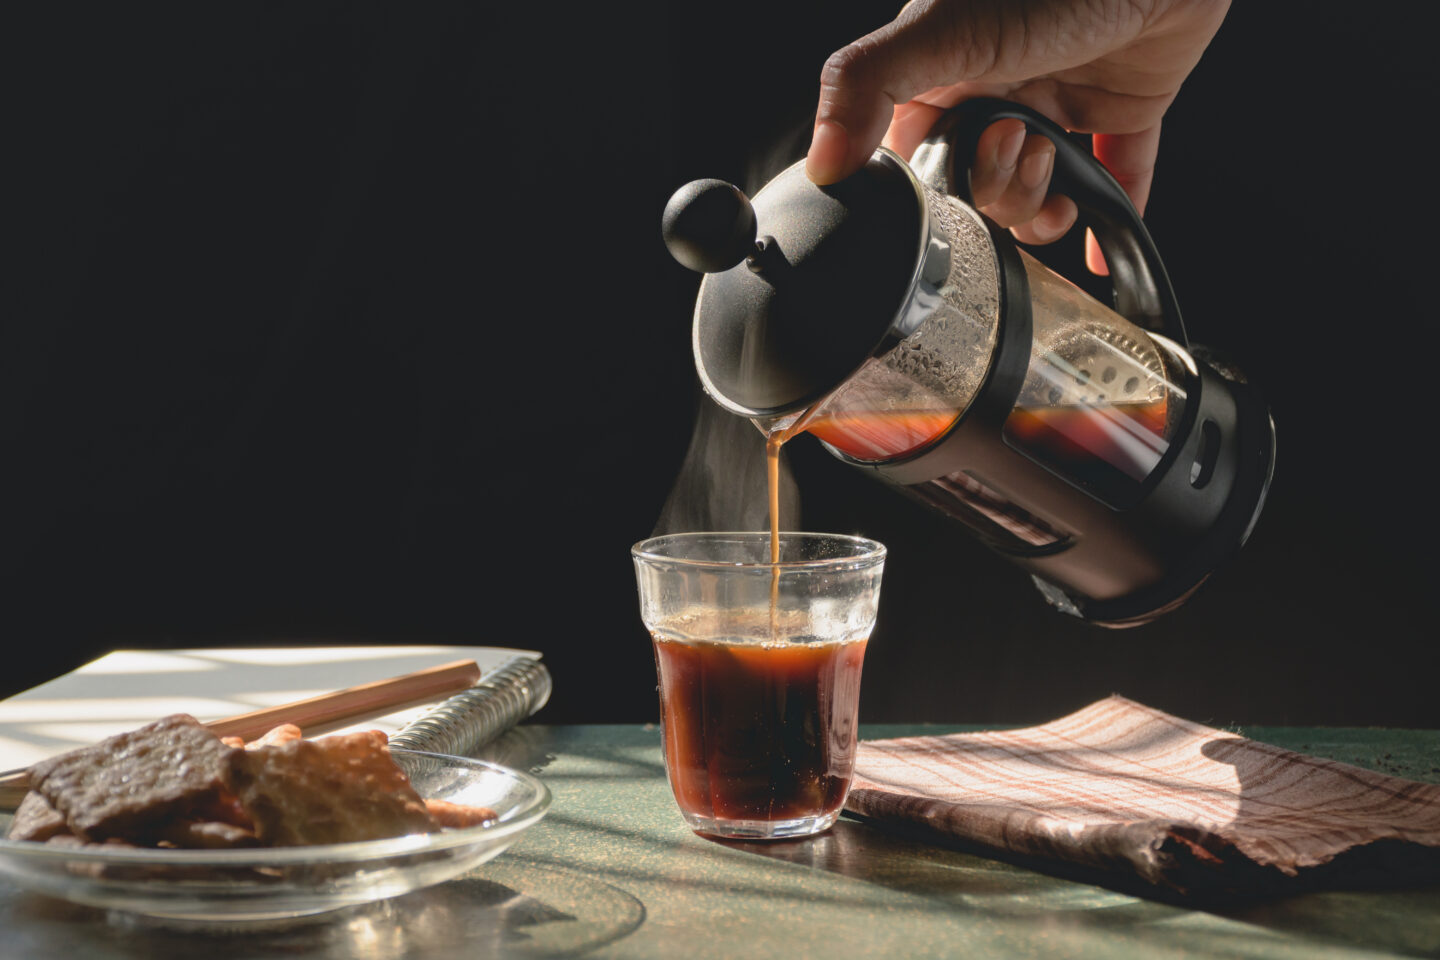 pouring-hot-coffee-from-a-french-press-with-dark-background